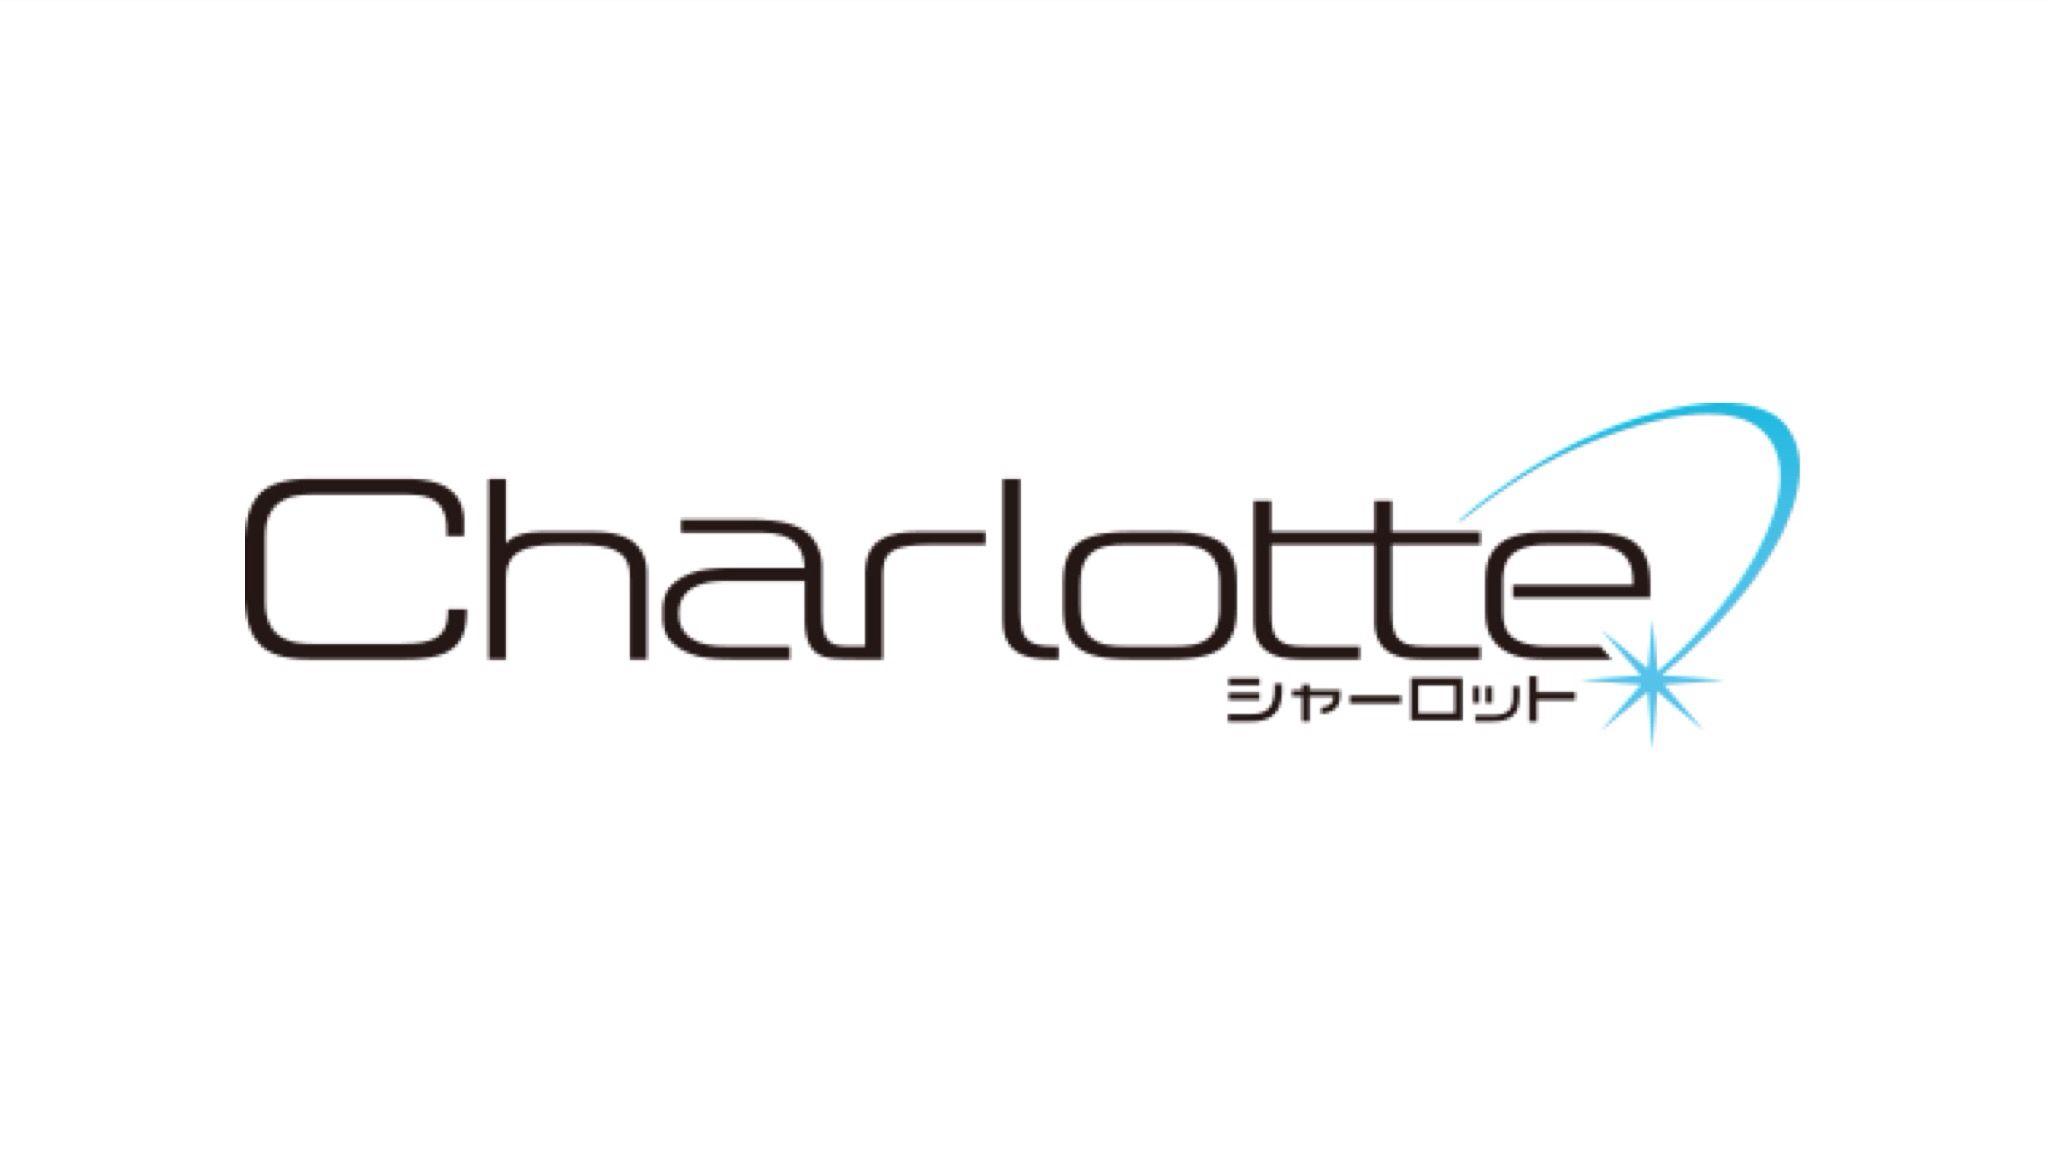 Charlotte Logo - Charlotte's Logo Is Really Great Because Of How It Uses A Comet Like